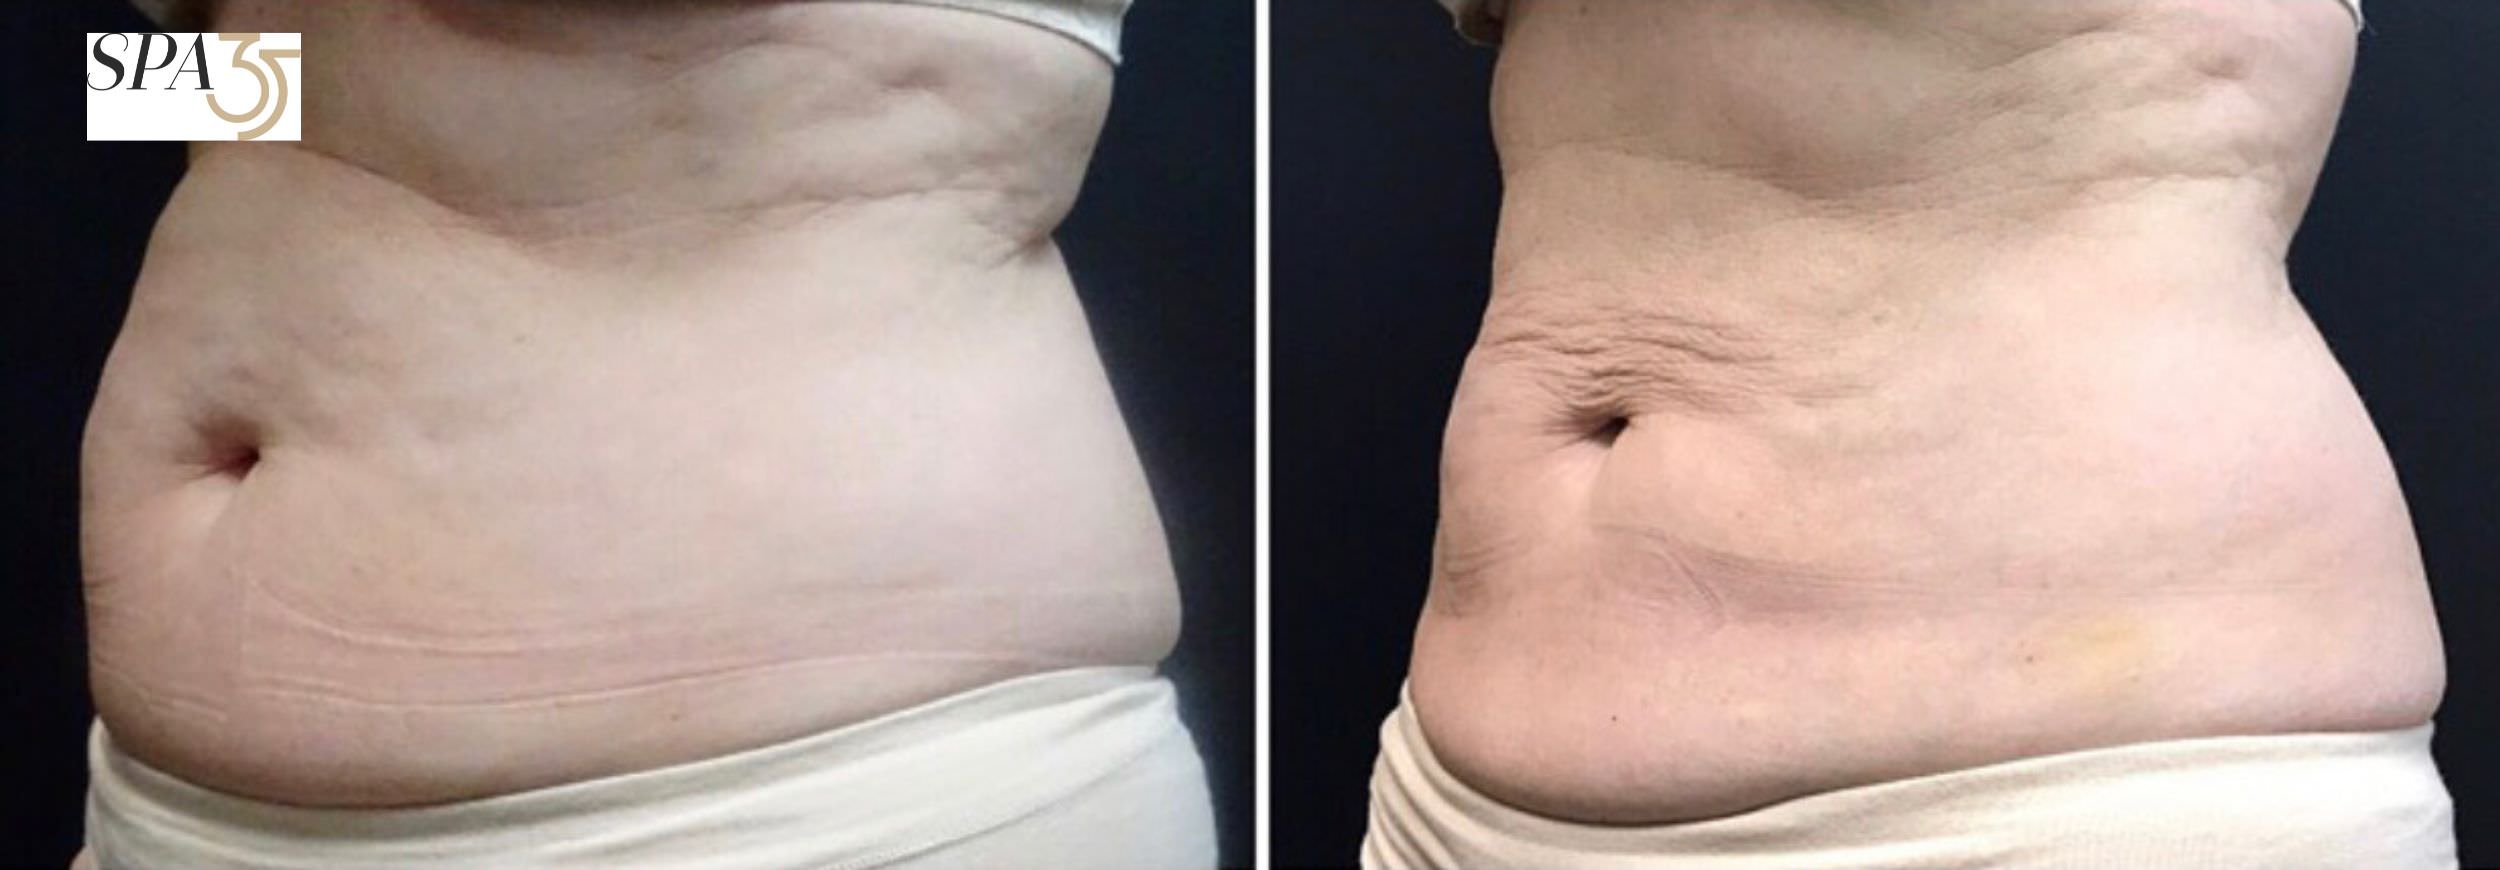 CoolSculpting Before and After - Abdomen